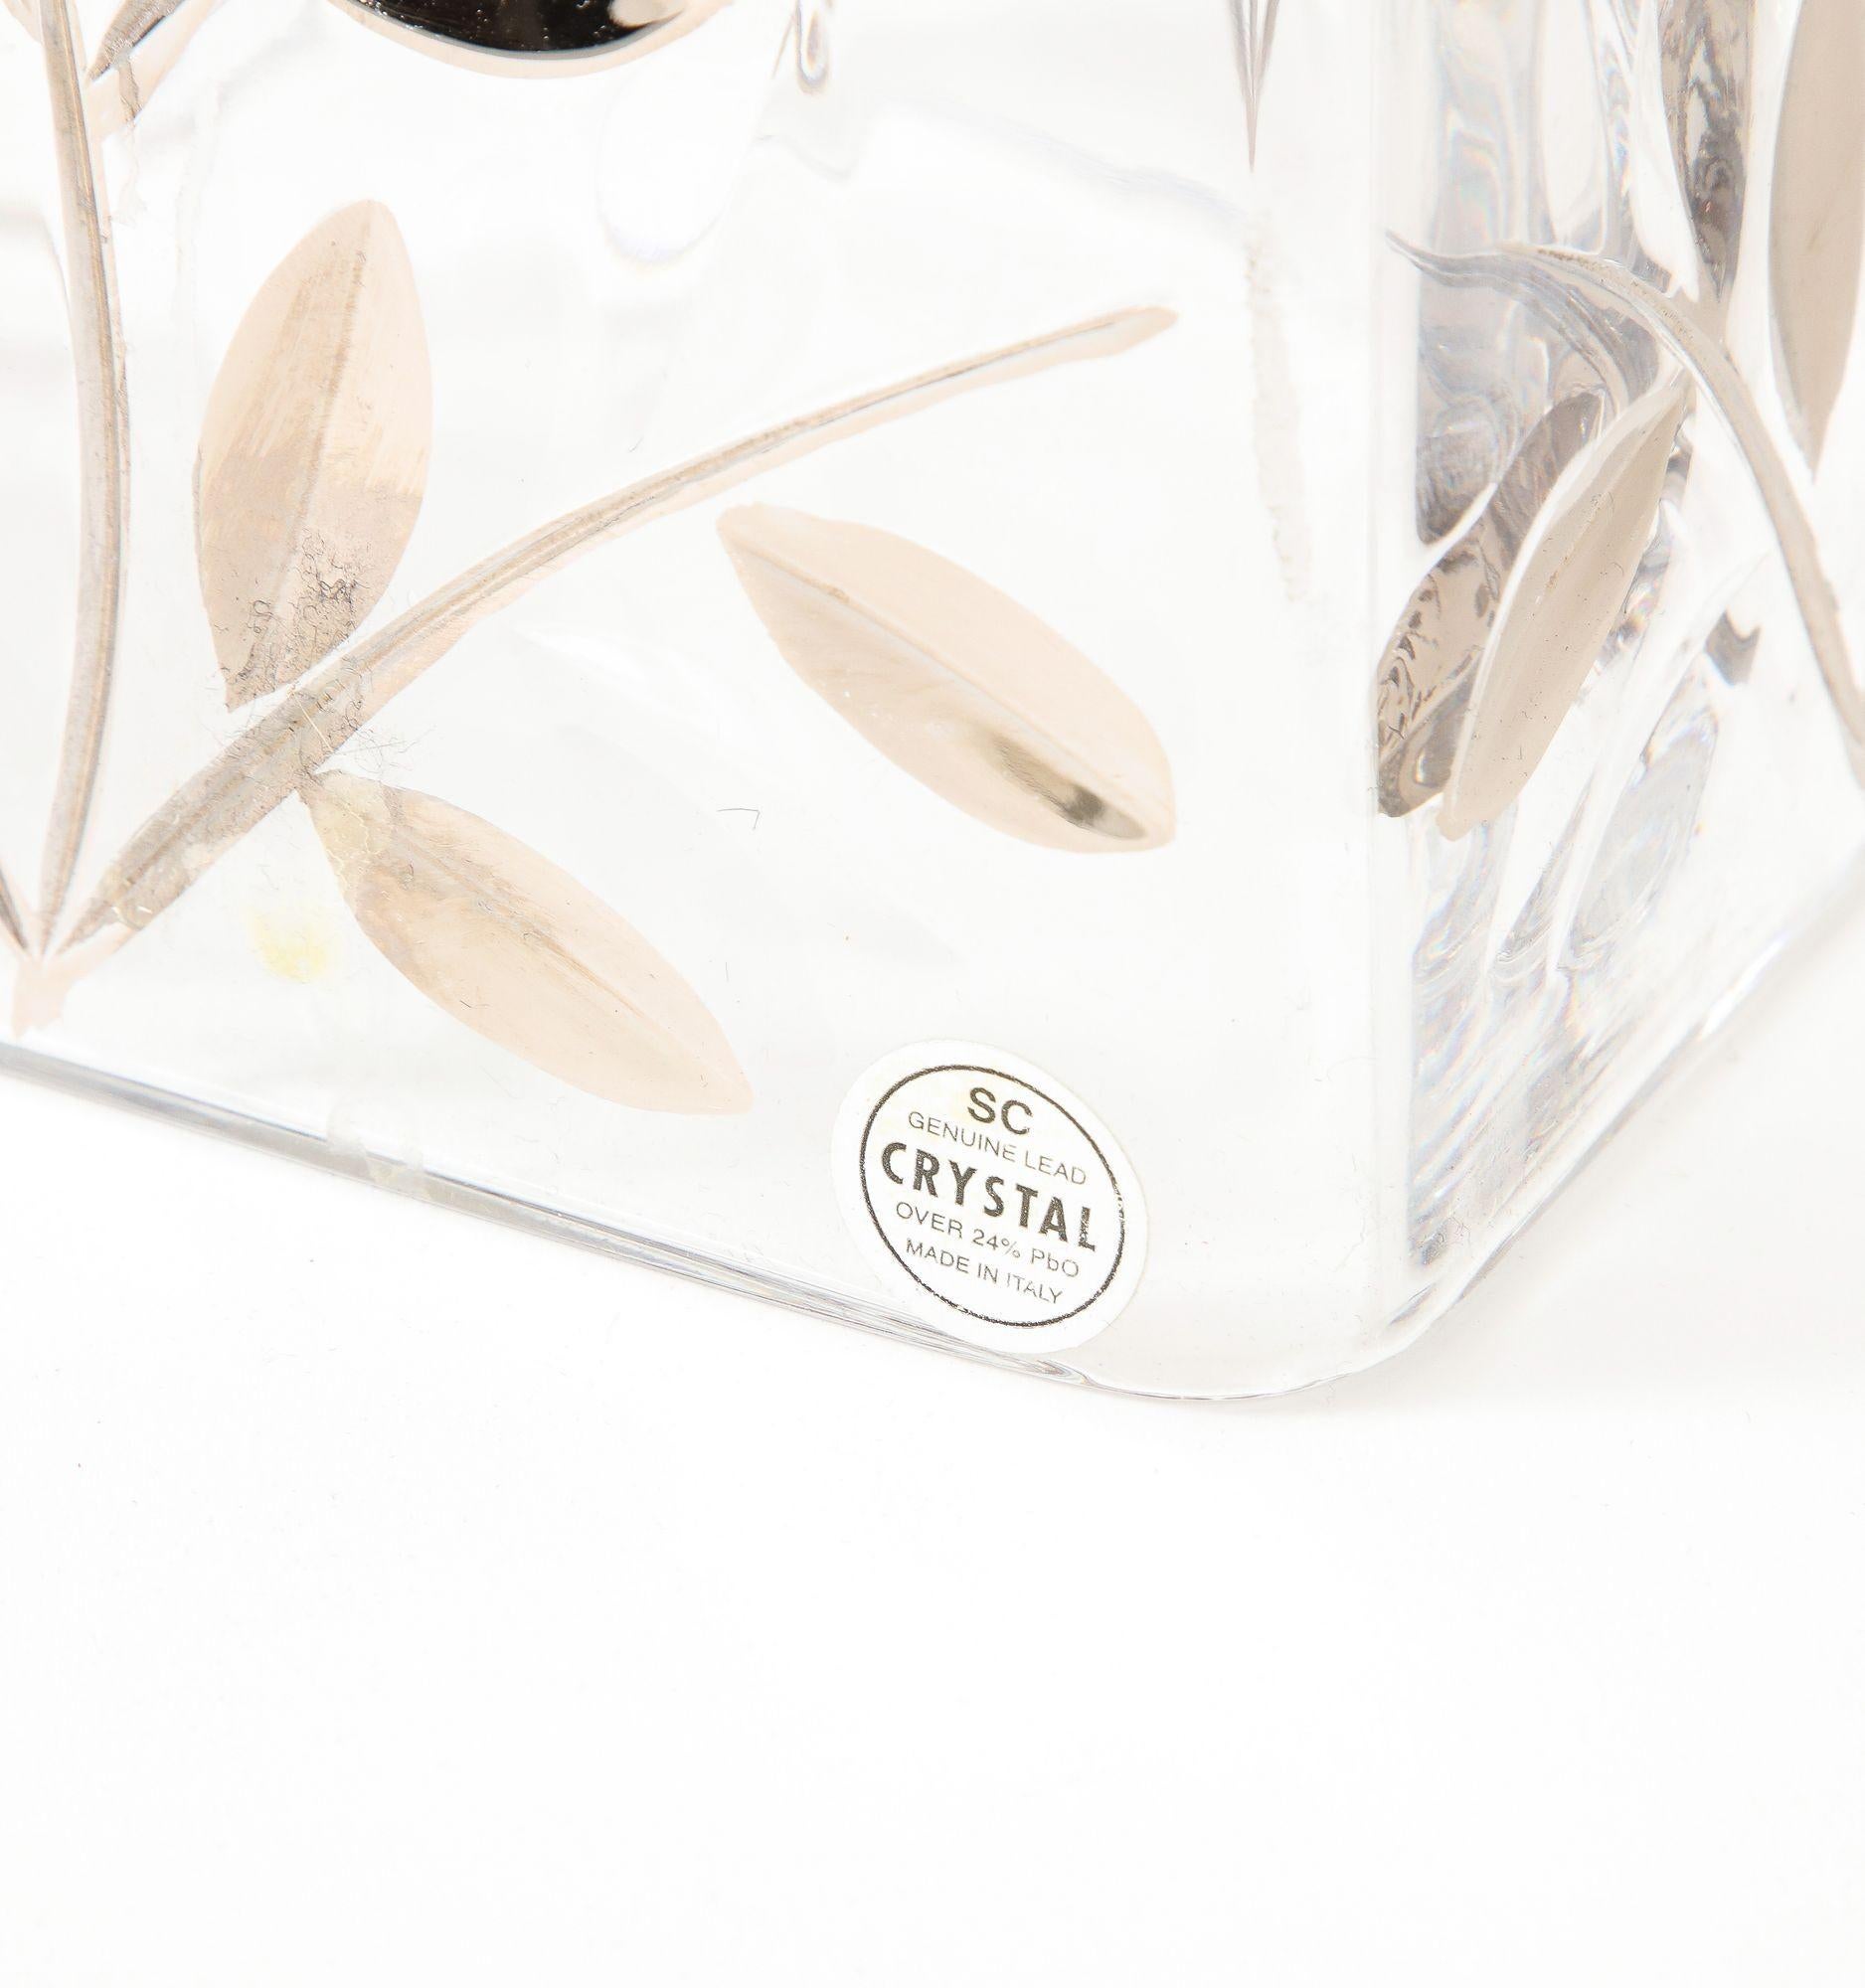 A great Italian crystal waste basket and tissue cover with silver leaf and beveled crystal decoration.